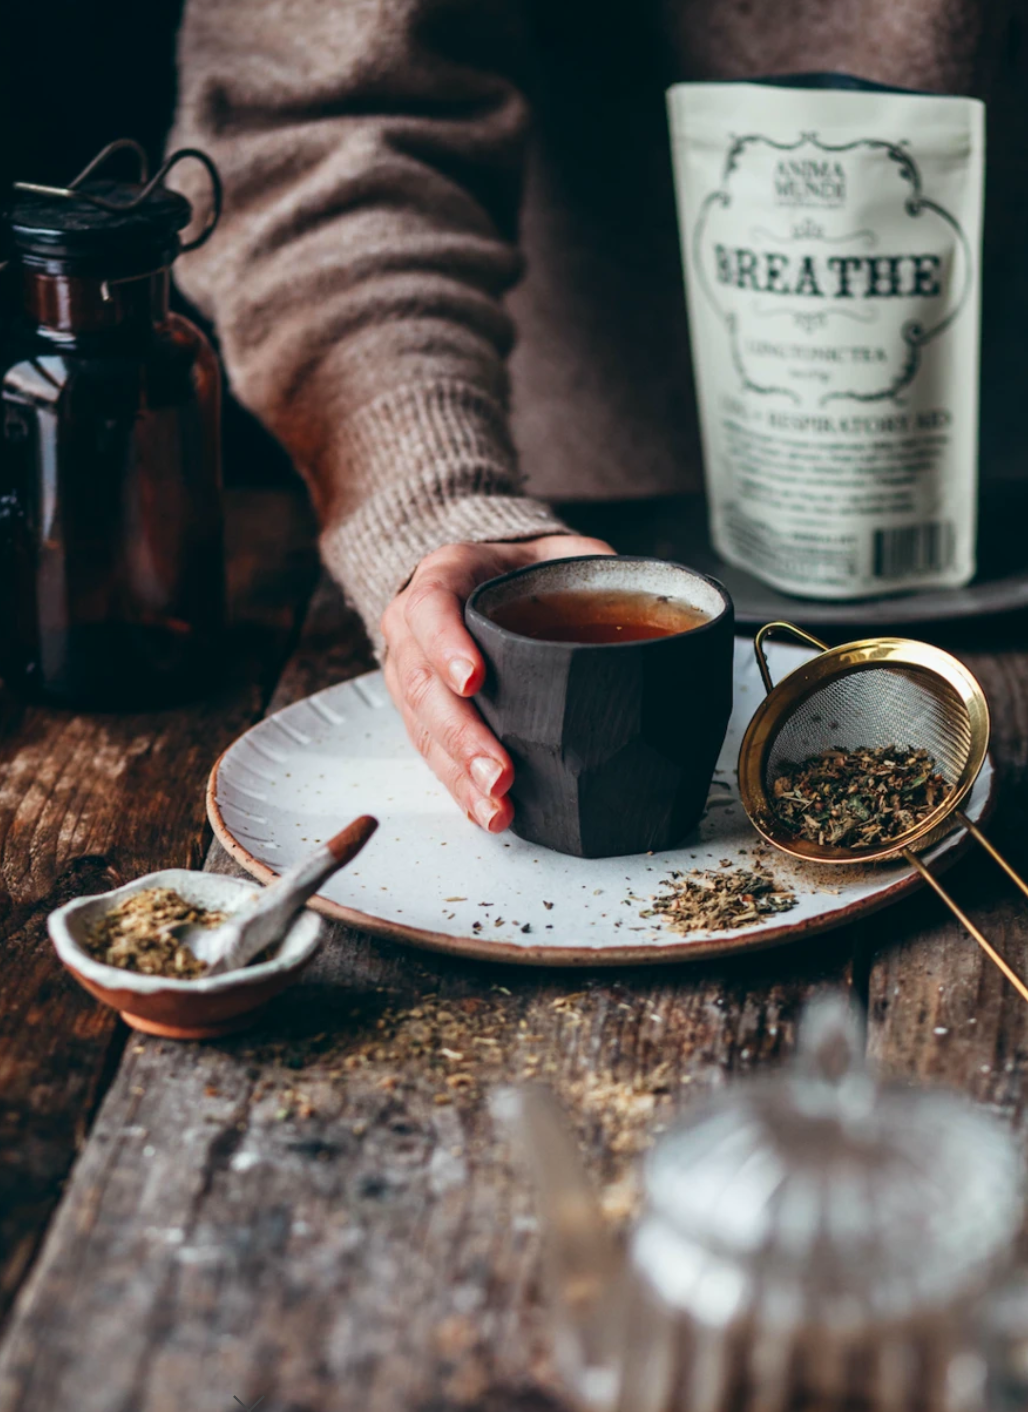 Breathe: Lung Tea (2oz) | Anima Mundi Herbals | Raw Living UK | Herbal Teas | Anima Mundi&#39;s Breathe &#39;Lung&#39; Tea is a Strengthening Tonic for the Lungs. It is made from Holy Basil, Astragalus, Mullein, Reishi, Oatstraw, Nettles, and Ginger.